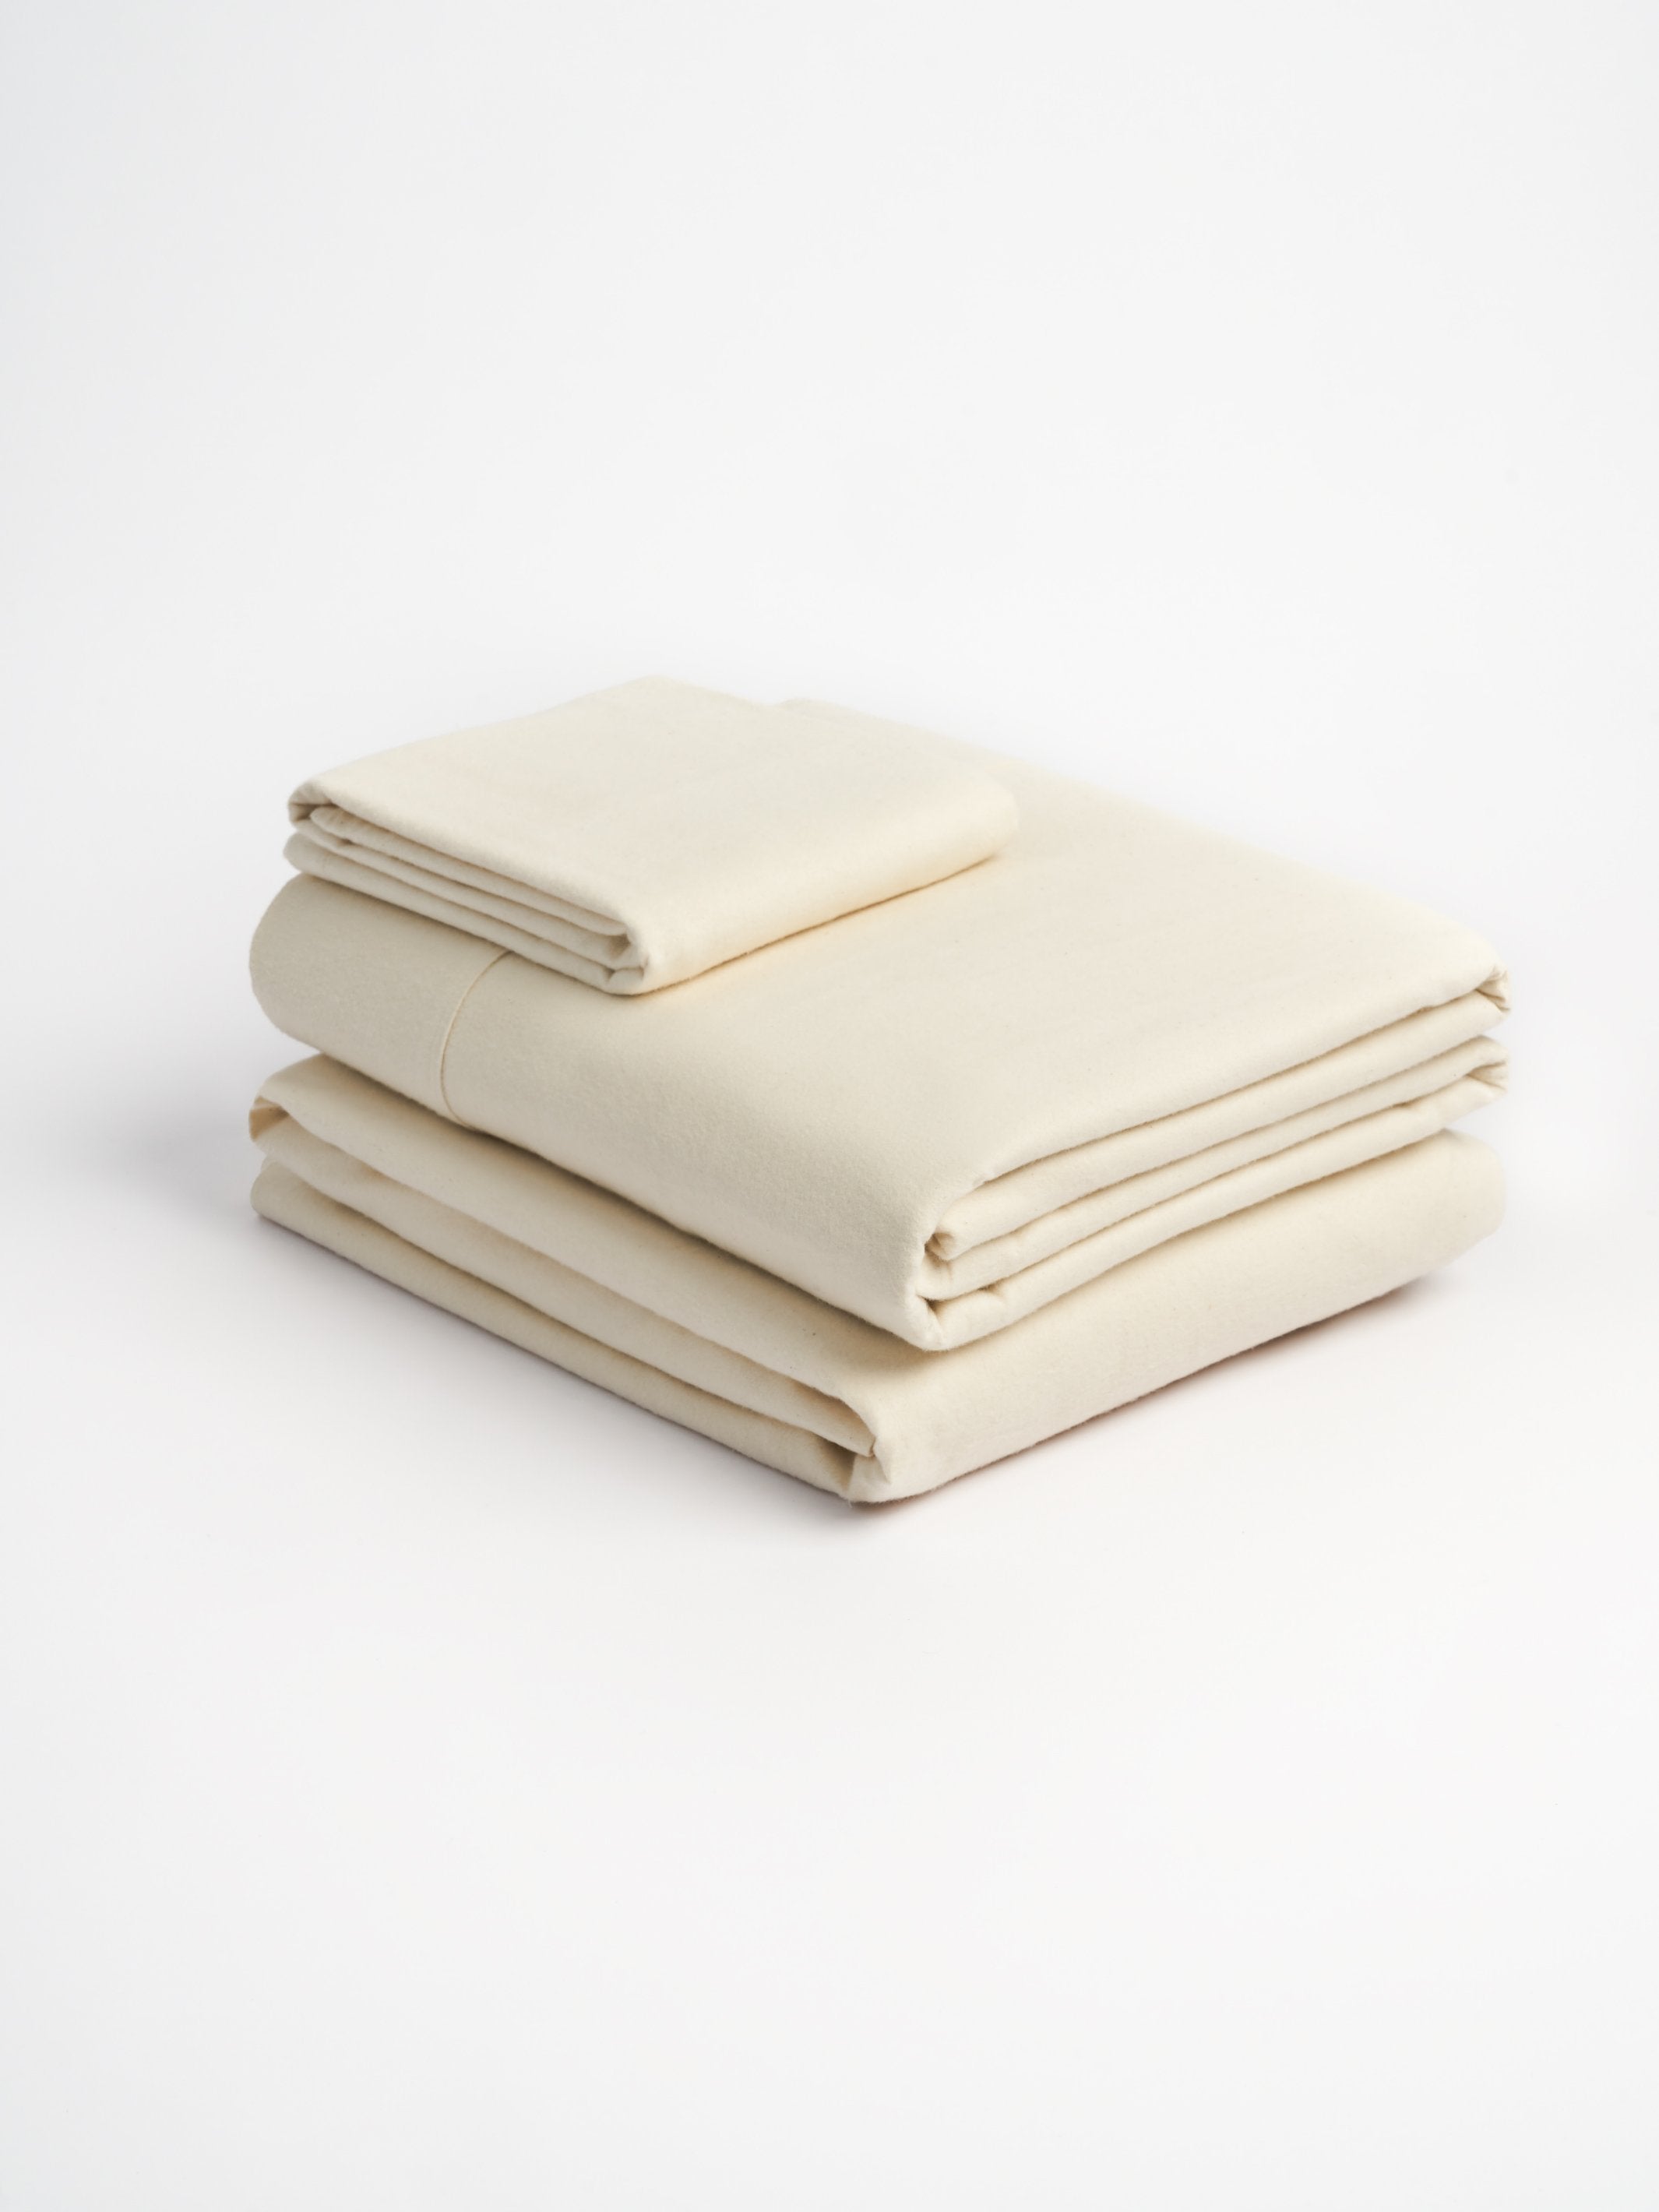 Organic and Fairtrade Warm + Cozy Flannel Bed Sheet Set